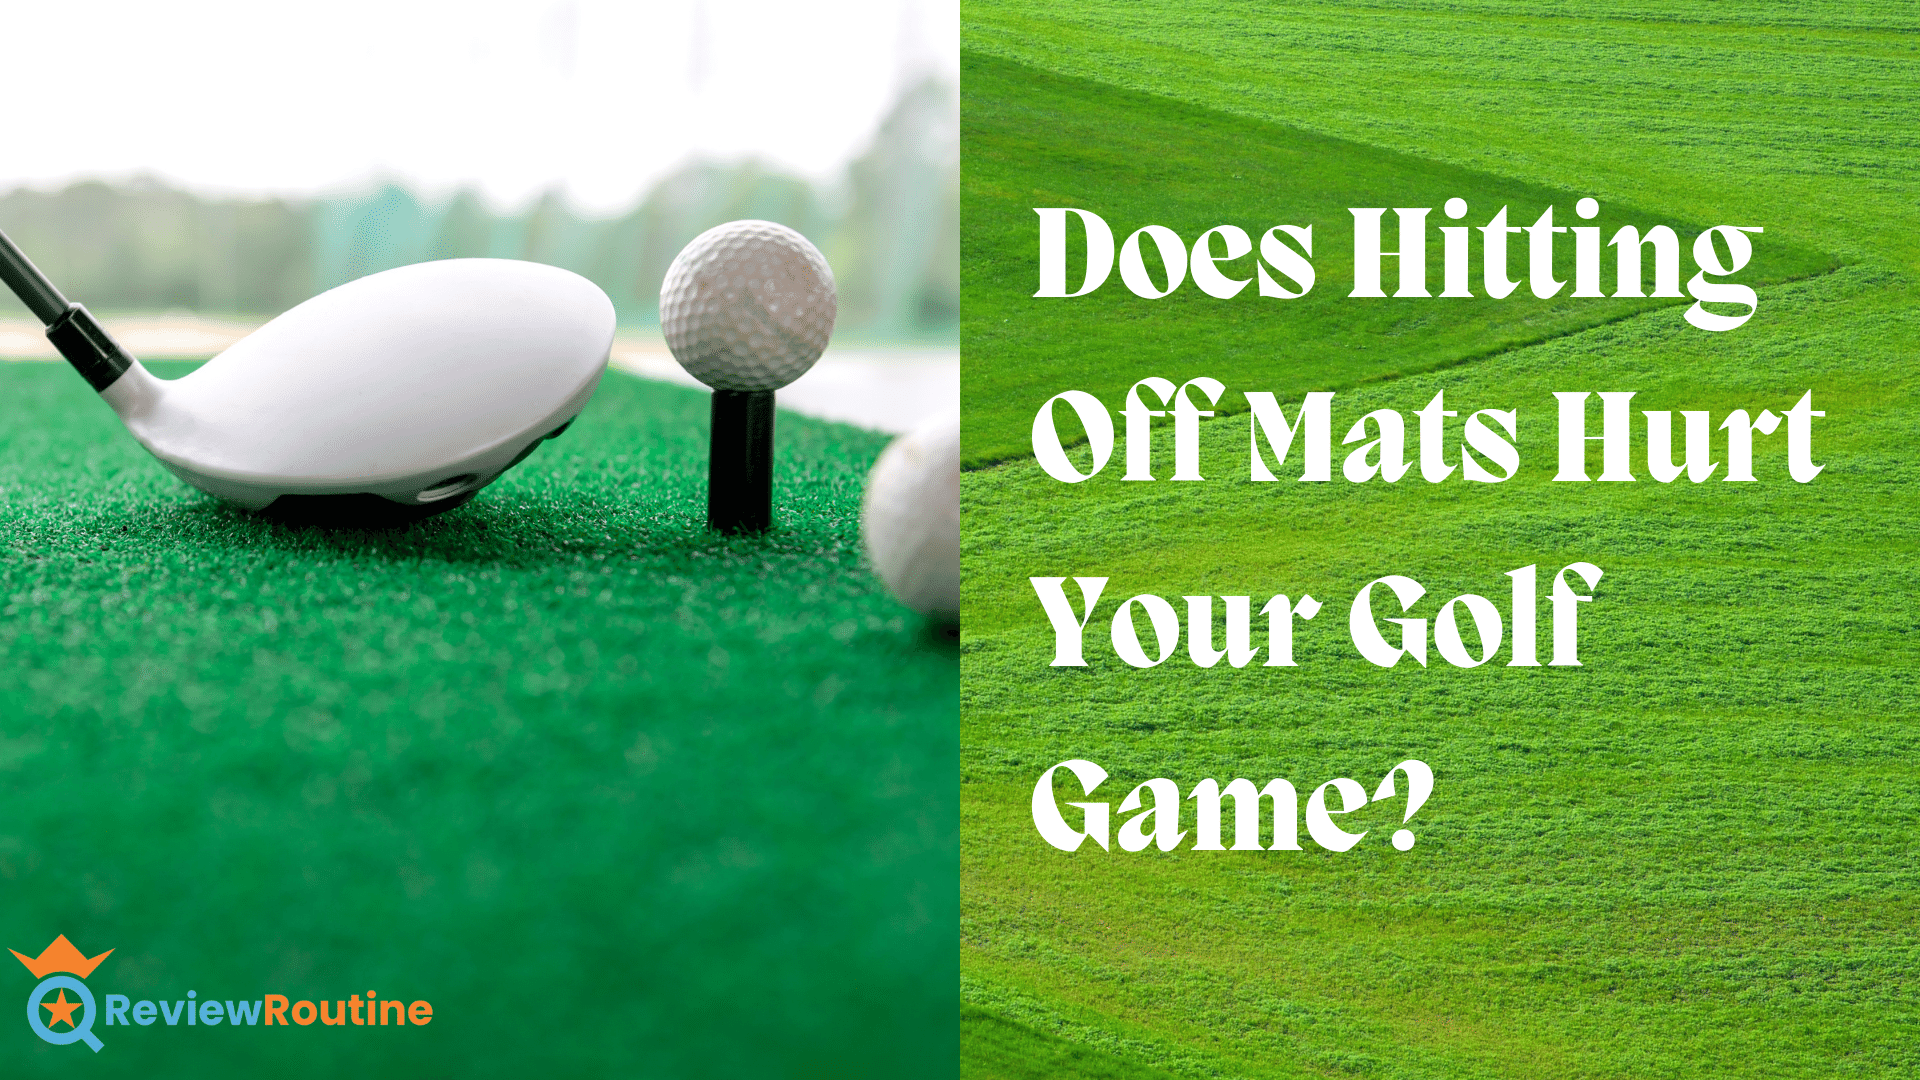 Does Hitting Off Mats Hurt Your Golf Game